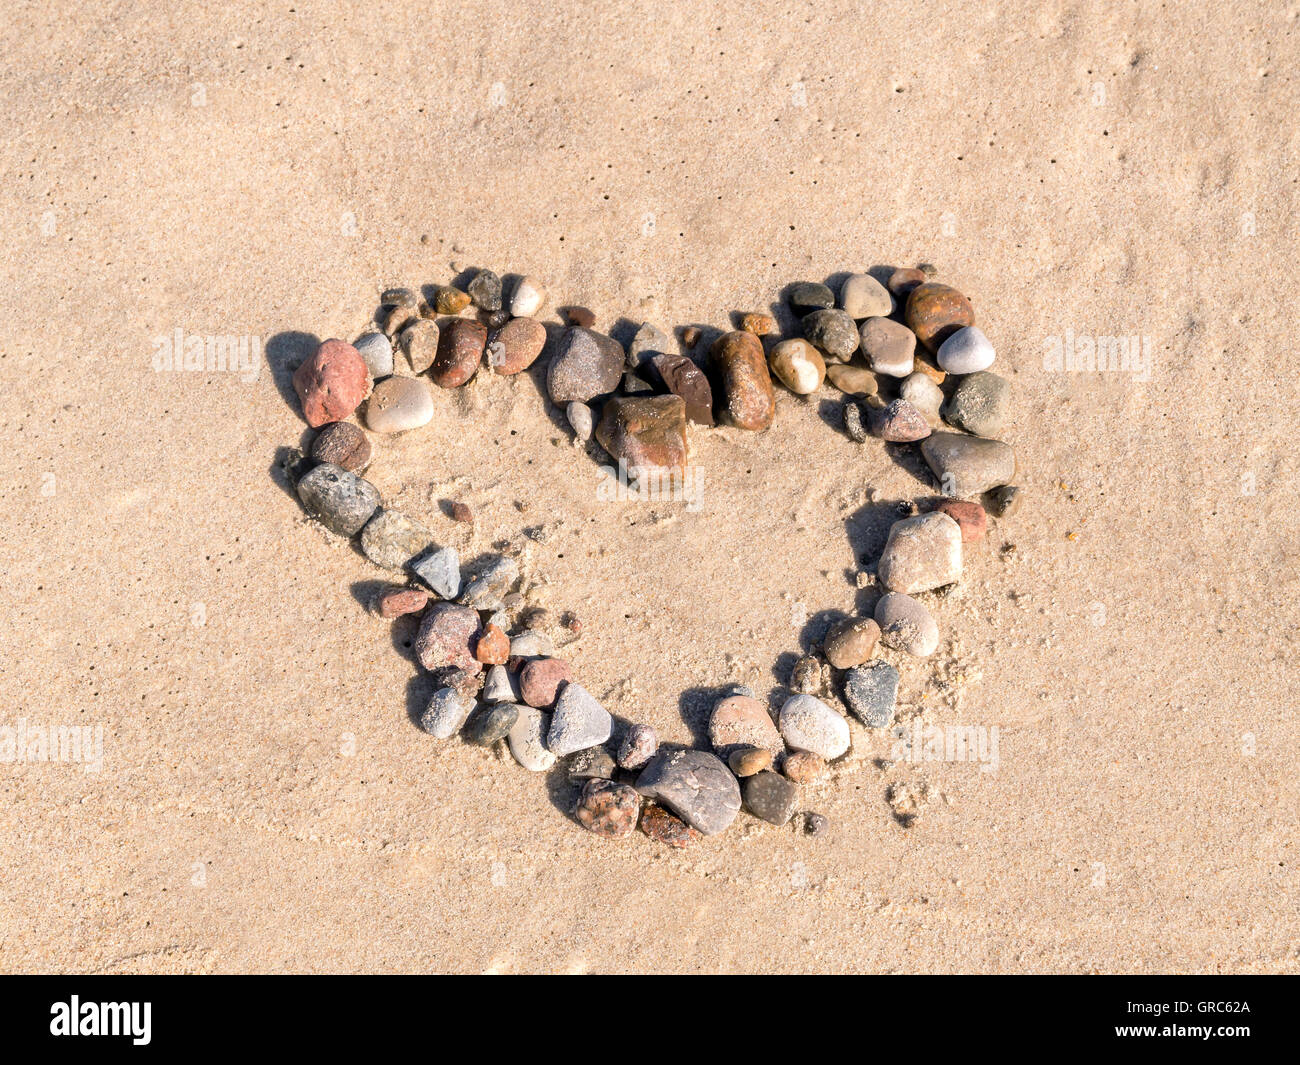 Heart sign arranged from pebbles on beach sand Stock Photo